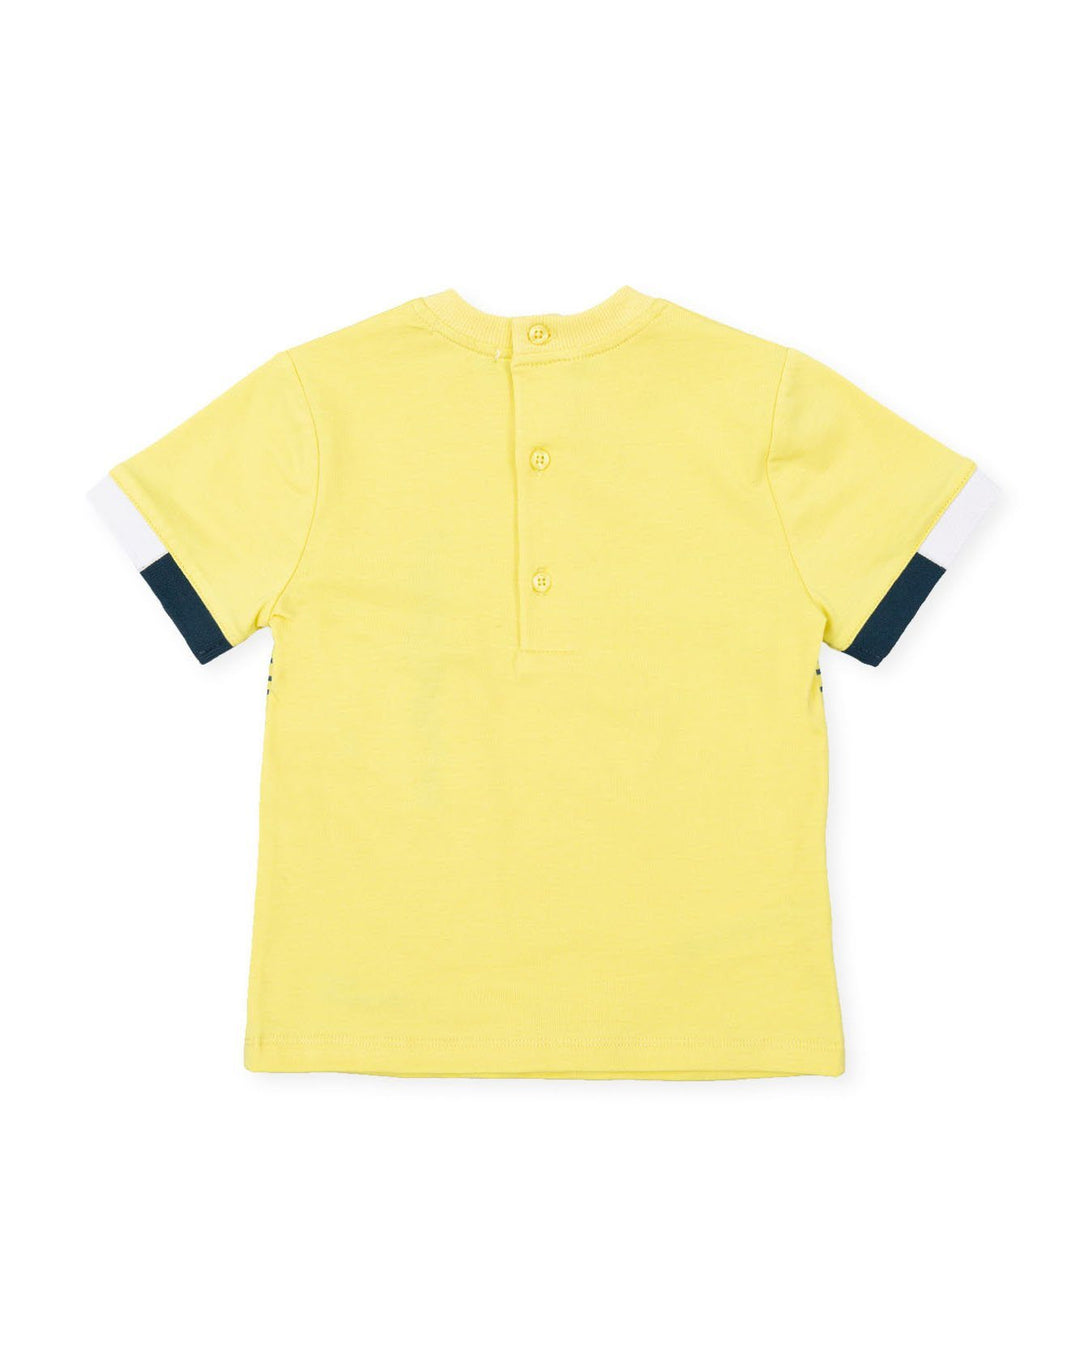 Tutto Piccolo "Ray" Yellow Nautical T-Shirt | Millie and John